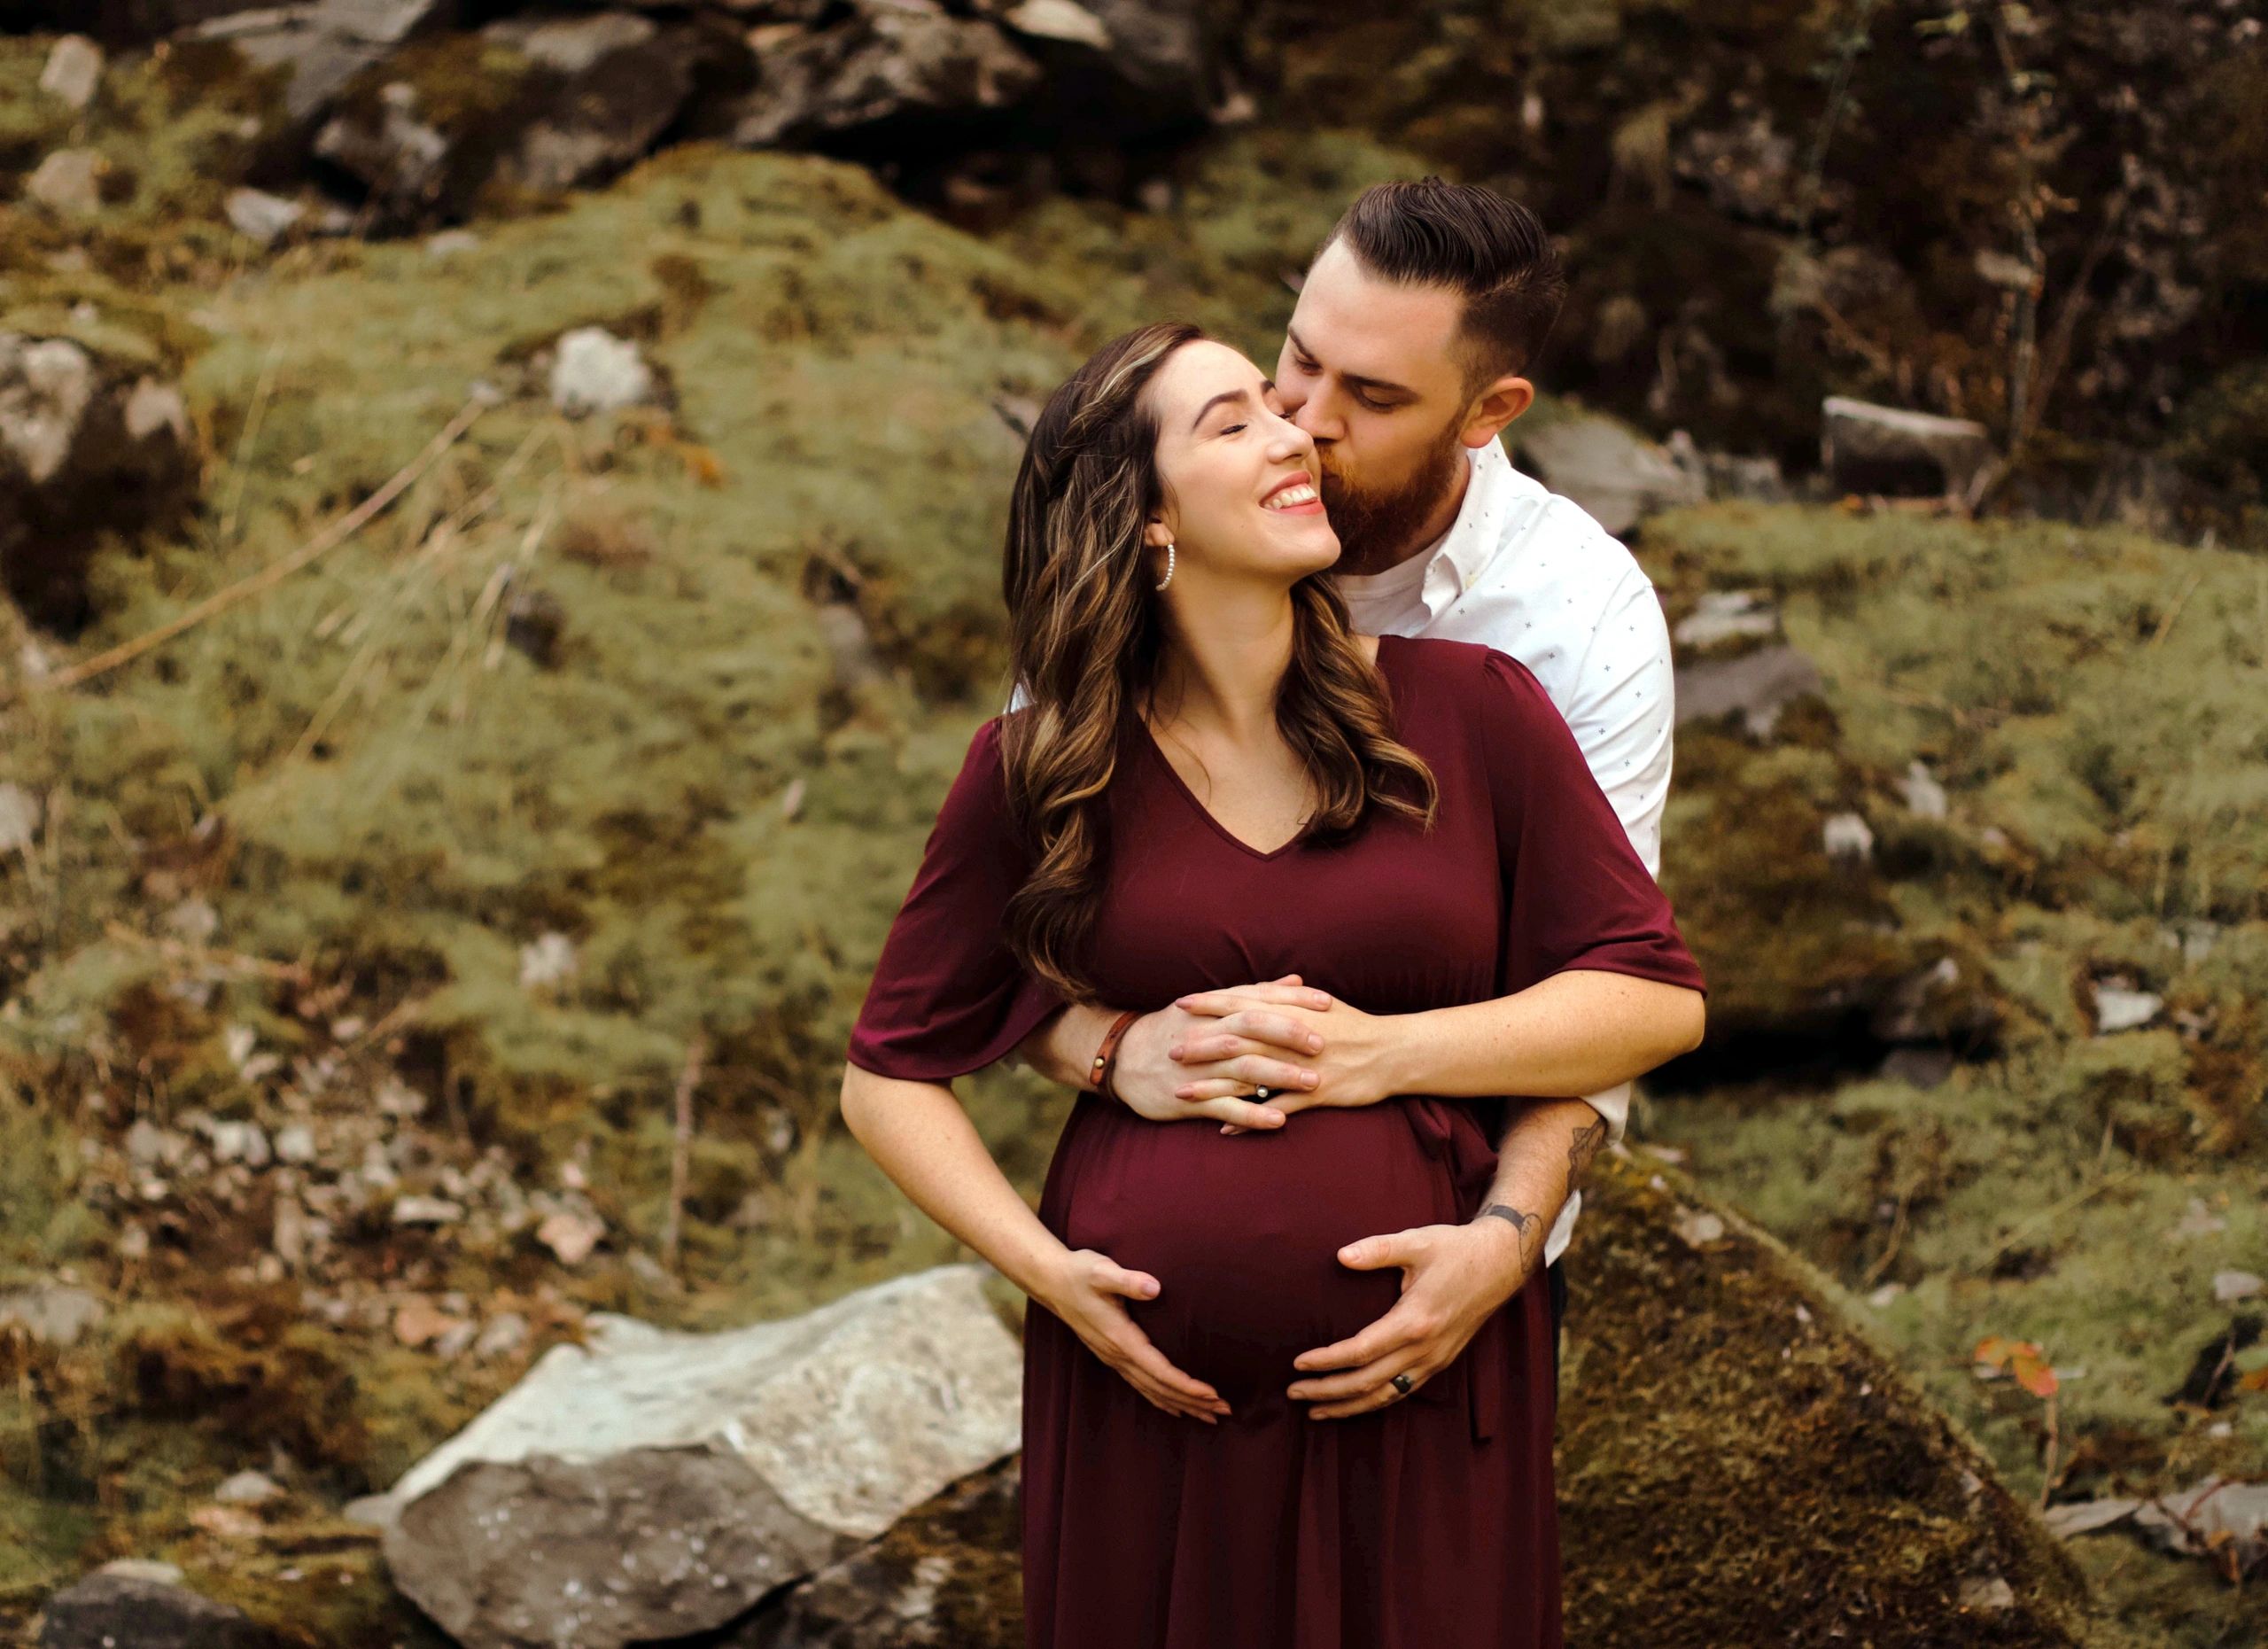 doula, pregnancy, maternity shoot, baby, couple, new baby, doula support, pregnancy announcement 